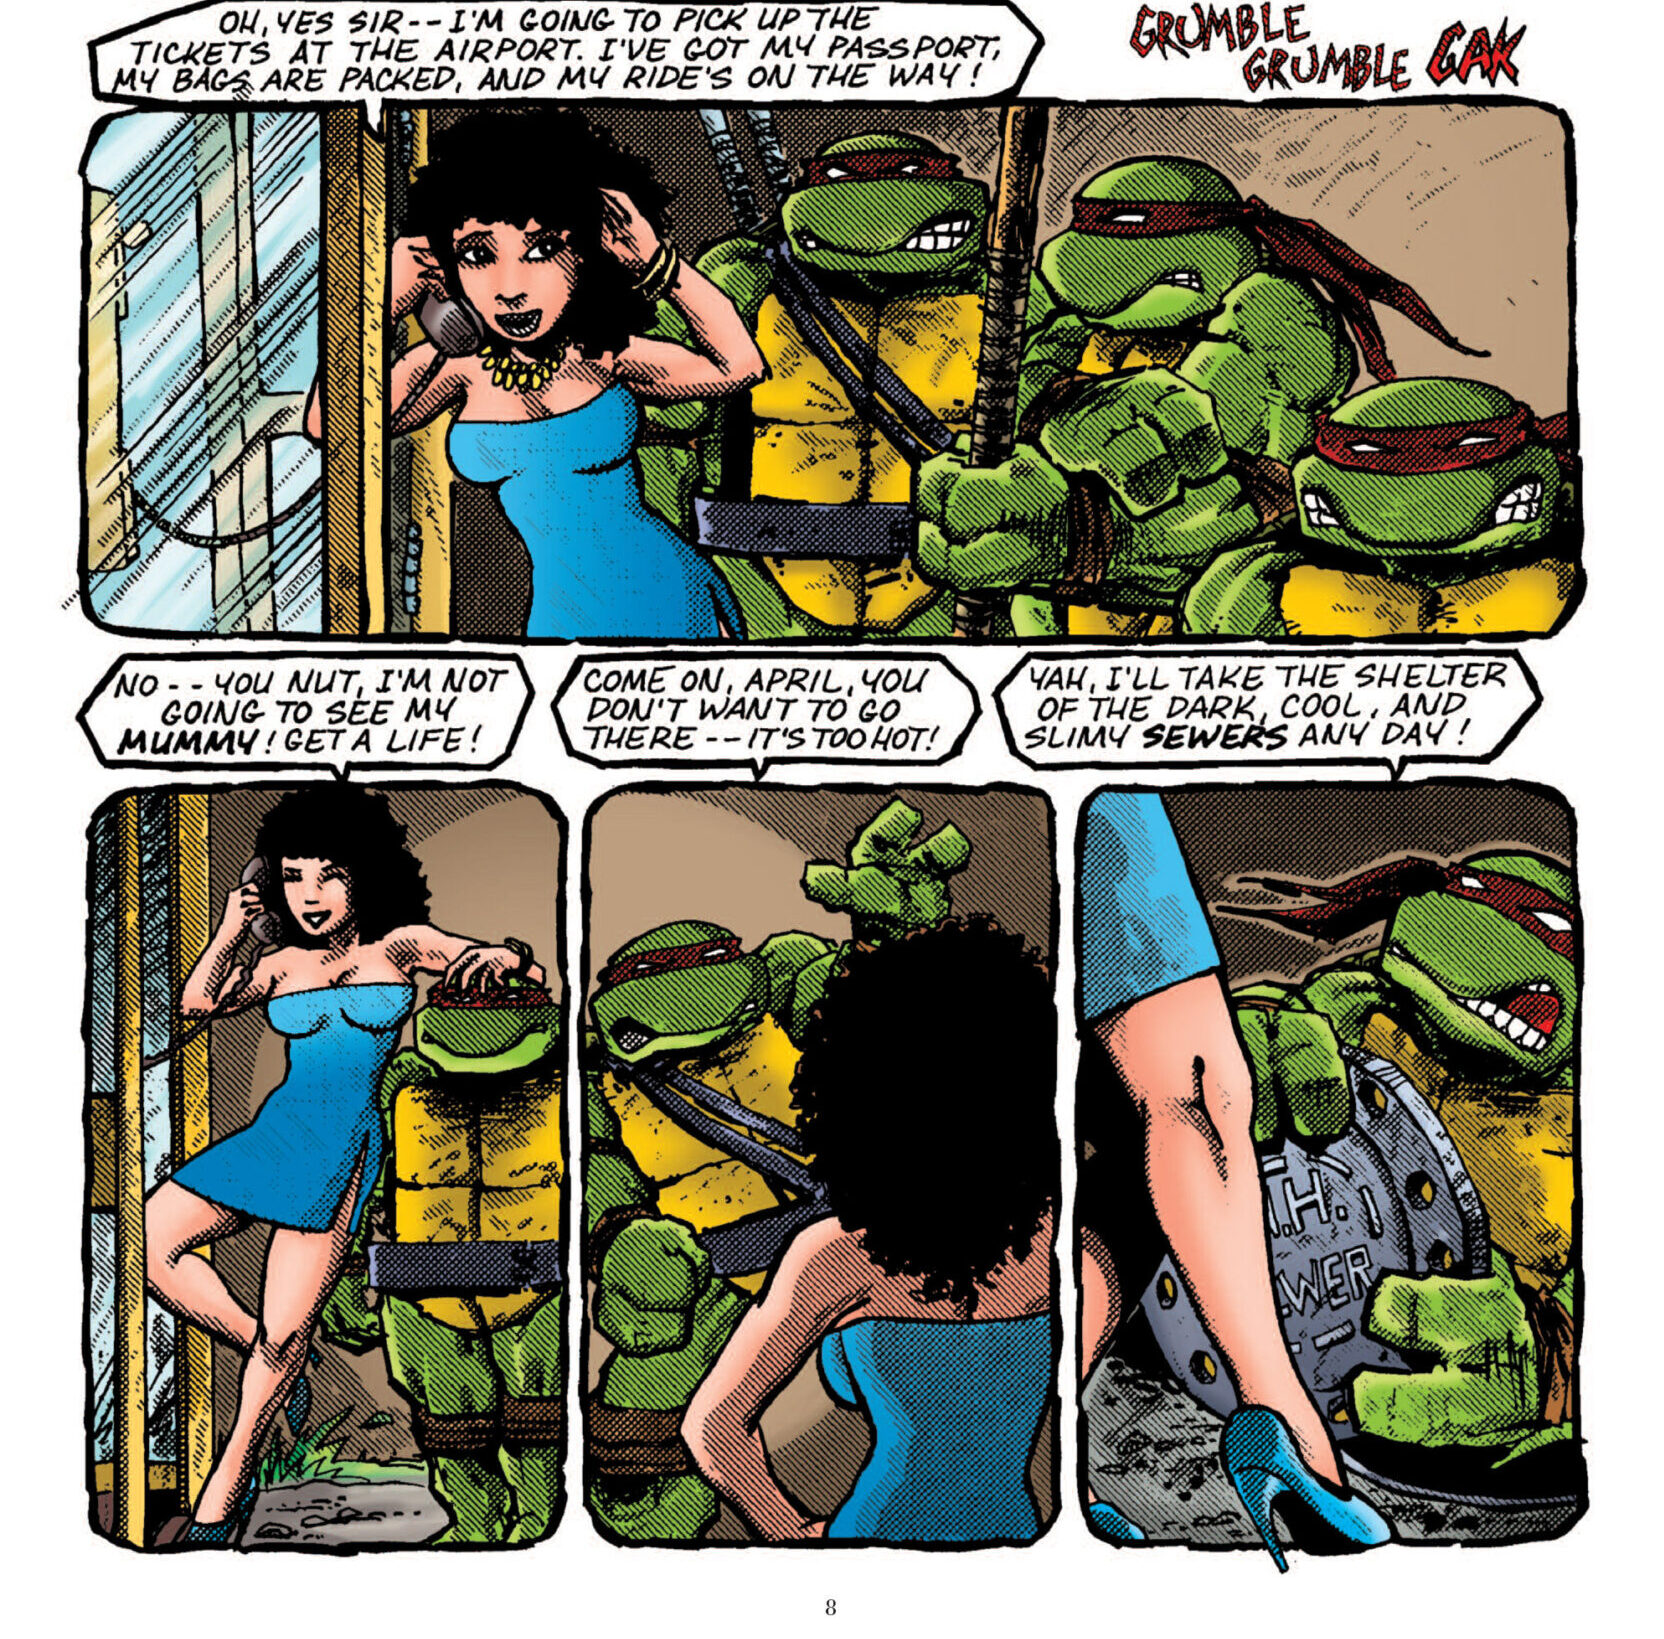 April O'Neil appears as intended in the IDW Classics Reprint of Teenage Mutant Ninja Turtles Vol. 1 #32 "Egyptian Adventure" (1990), Mirage Studios. Words and art by Mark Bodé, Kevin Eastman (inks on original B&W art only), Eric Talbot, Mary Kelleber.